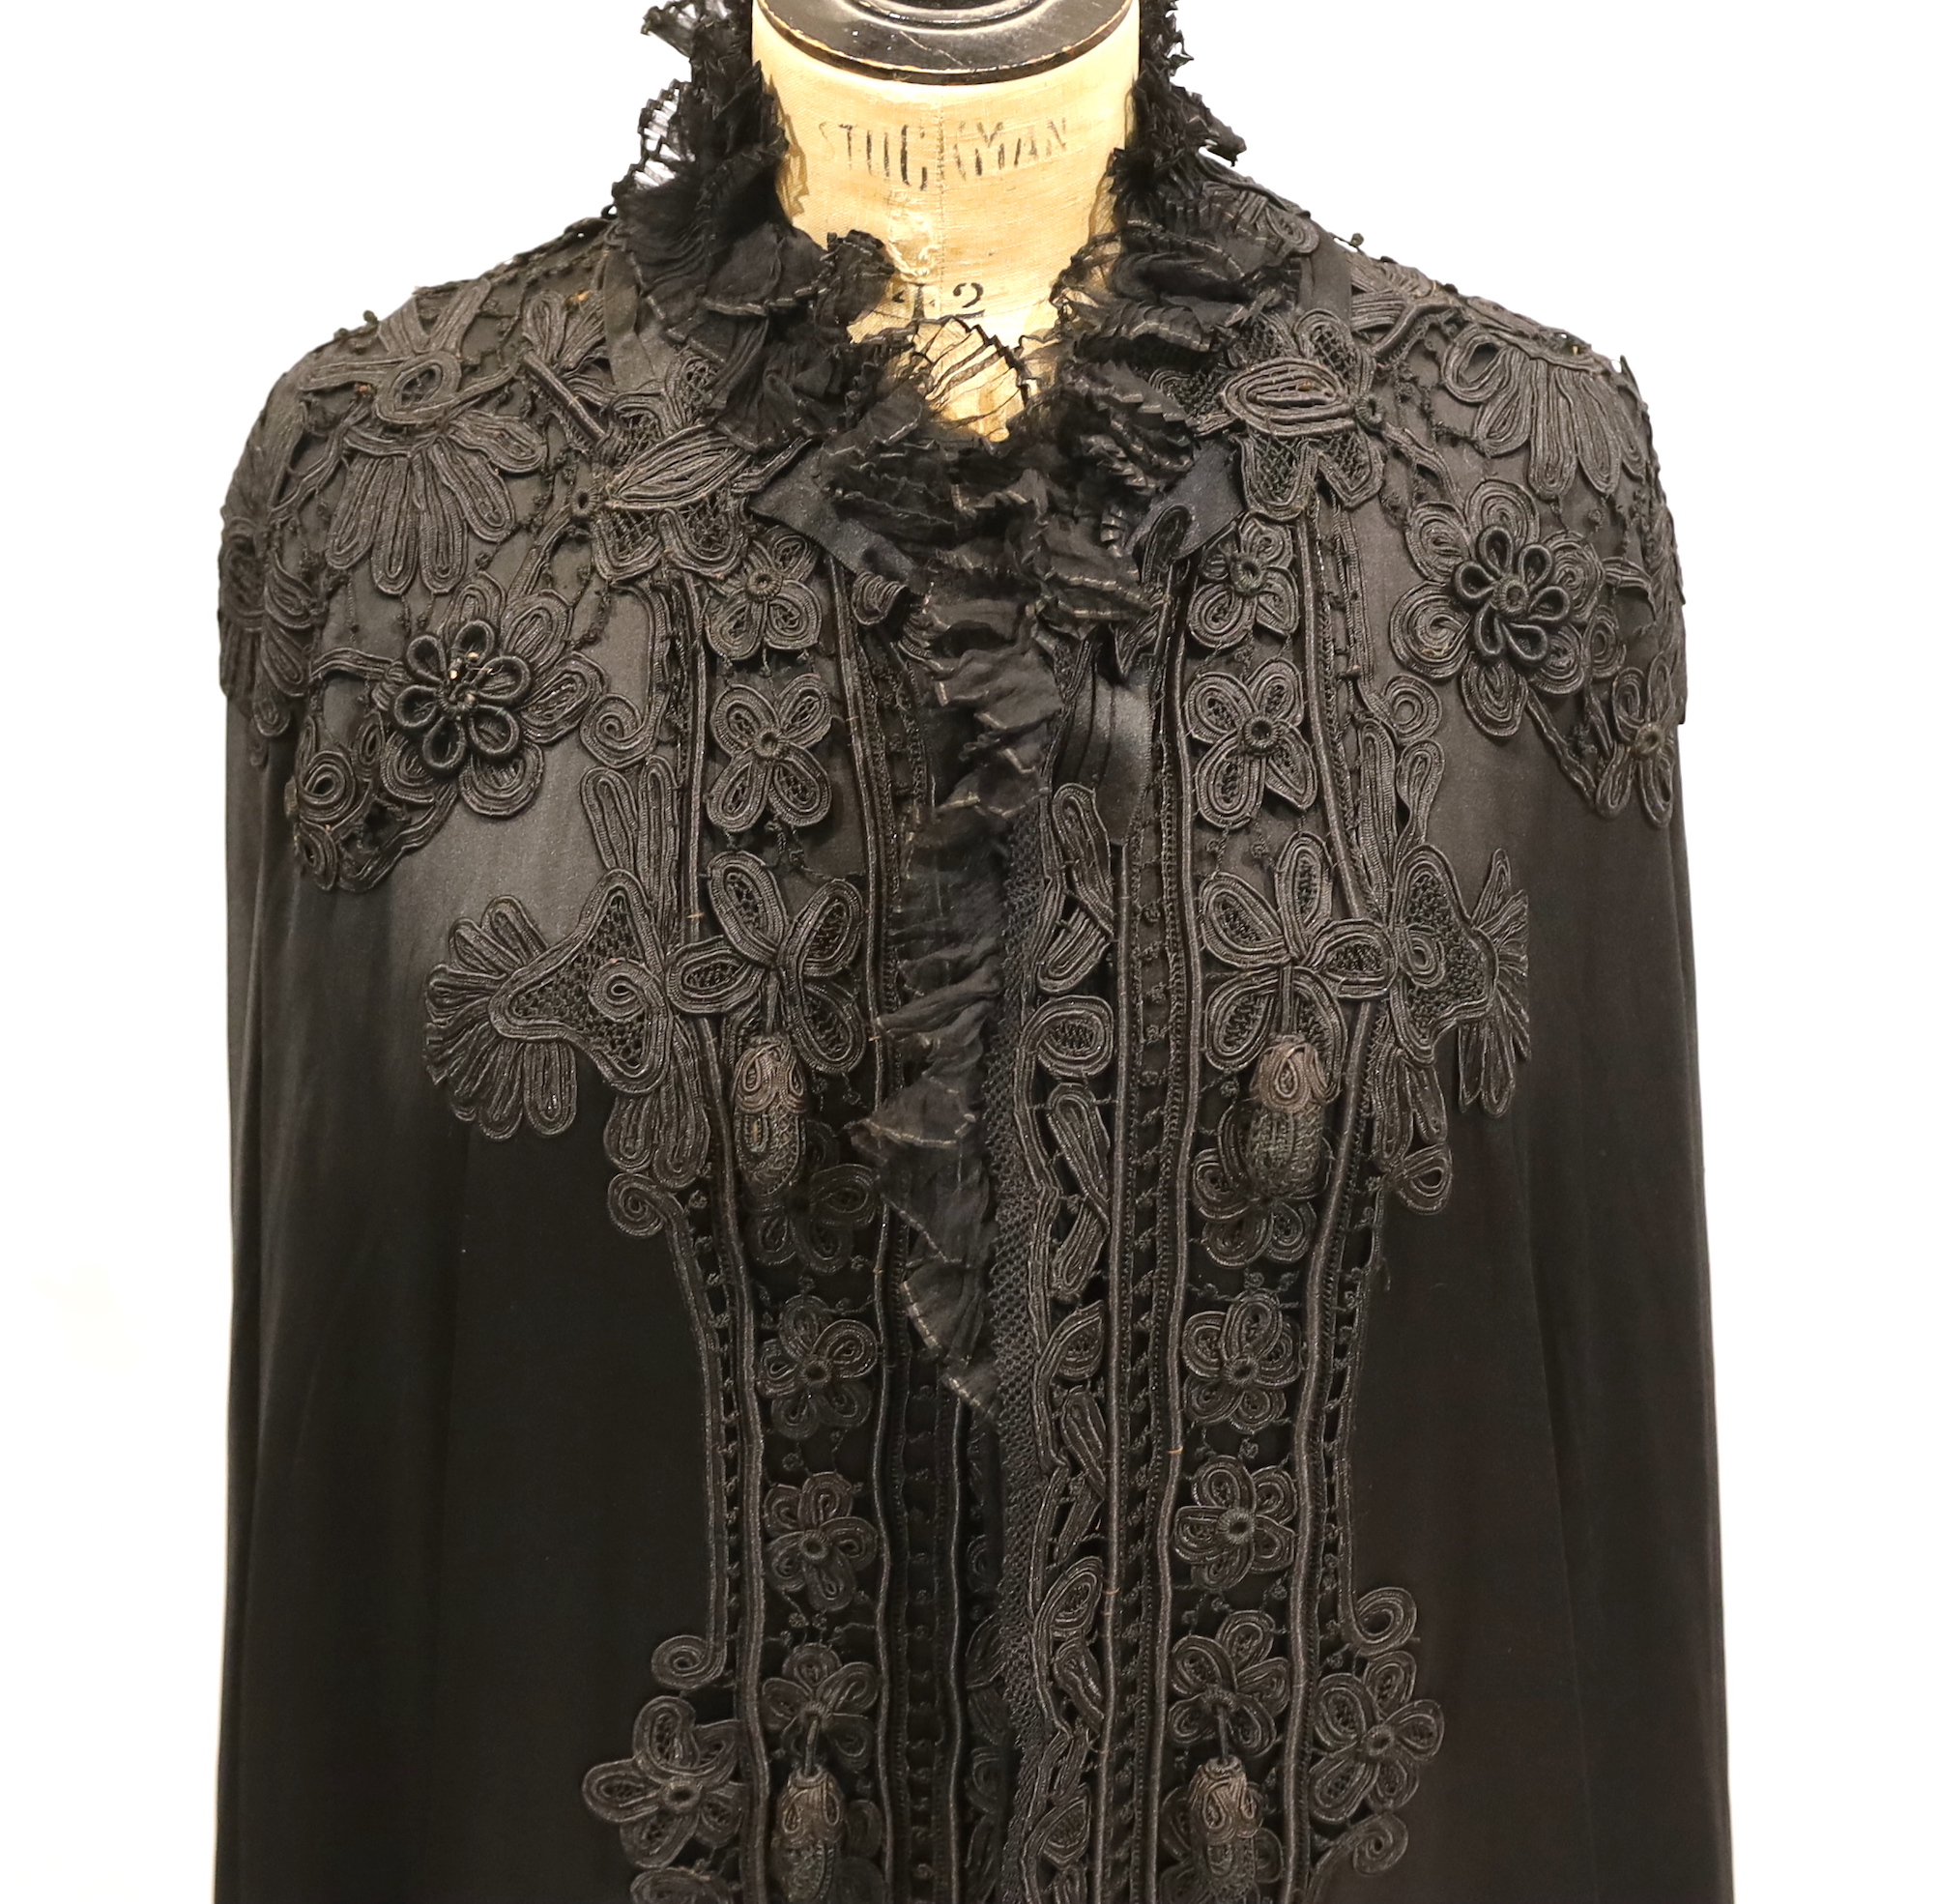 A Victorian black silk and tape lace opera cape, with black pleated chiffon collar